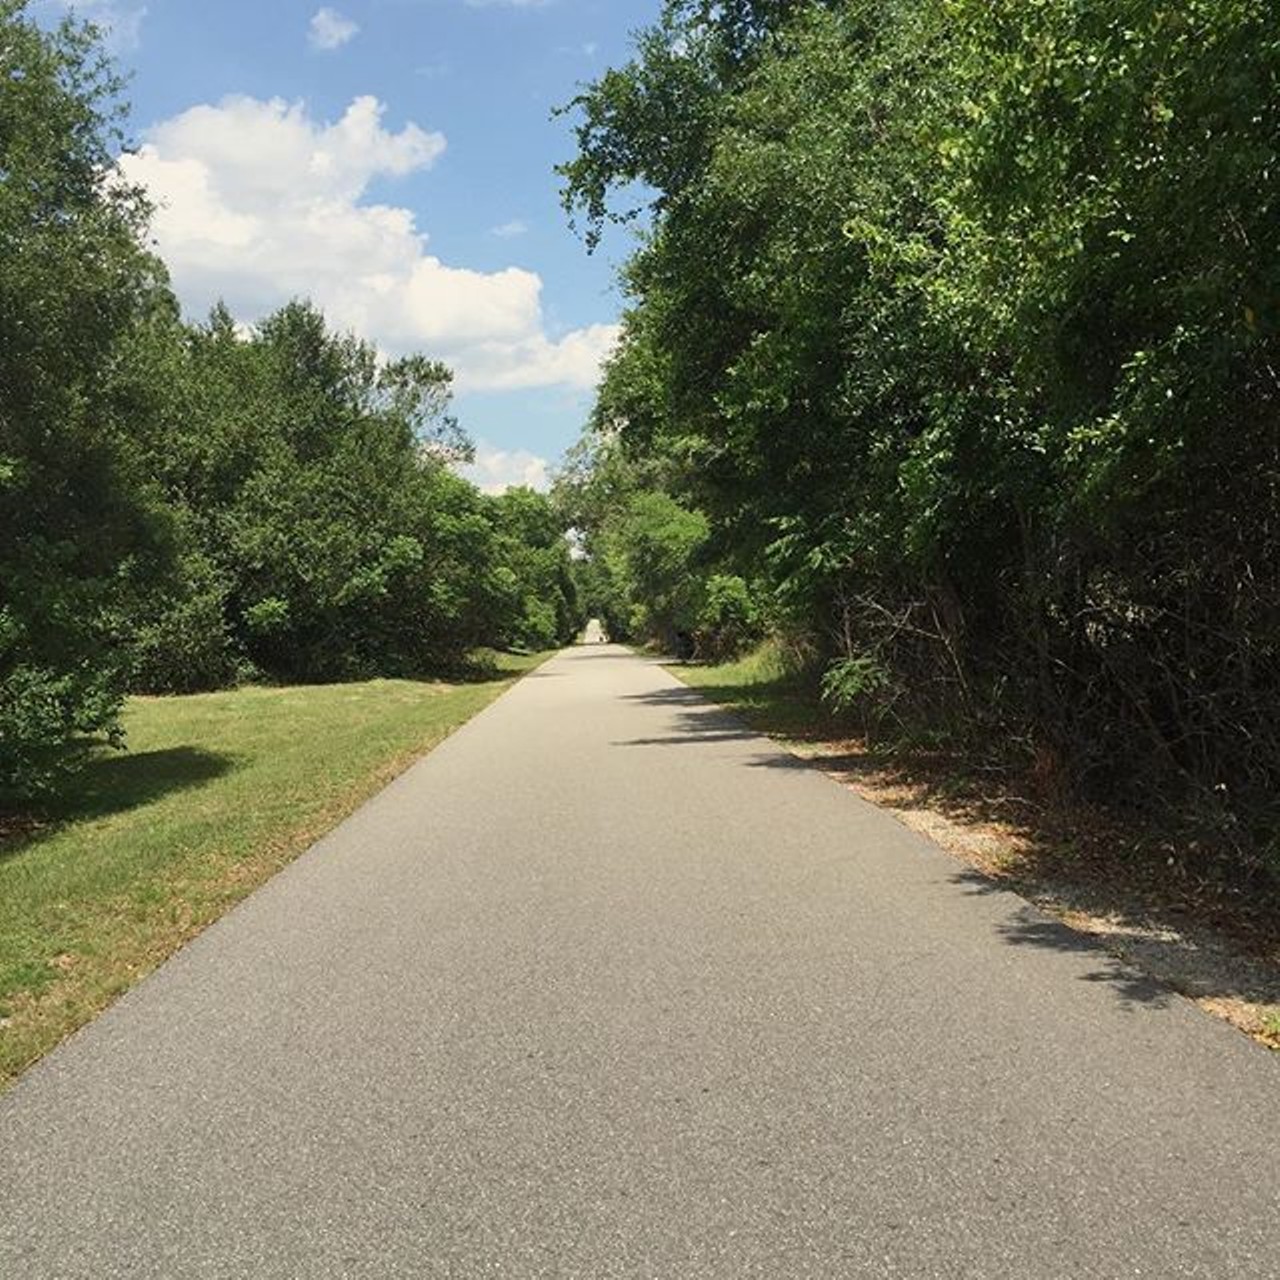 Seminole Wekiva Trail
This paved recreational and commuting path is about 14 miles, linking Altamonte Springs, Lake Mary and Longwood. The path is a part of the Seminole County&#146;s Showcase Trails due to its scenery, many users and length.
Photo via Alisonm95/Instagram